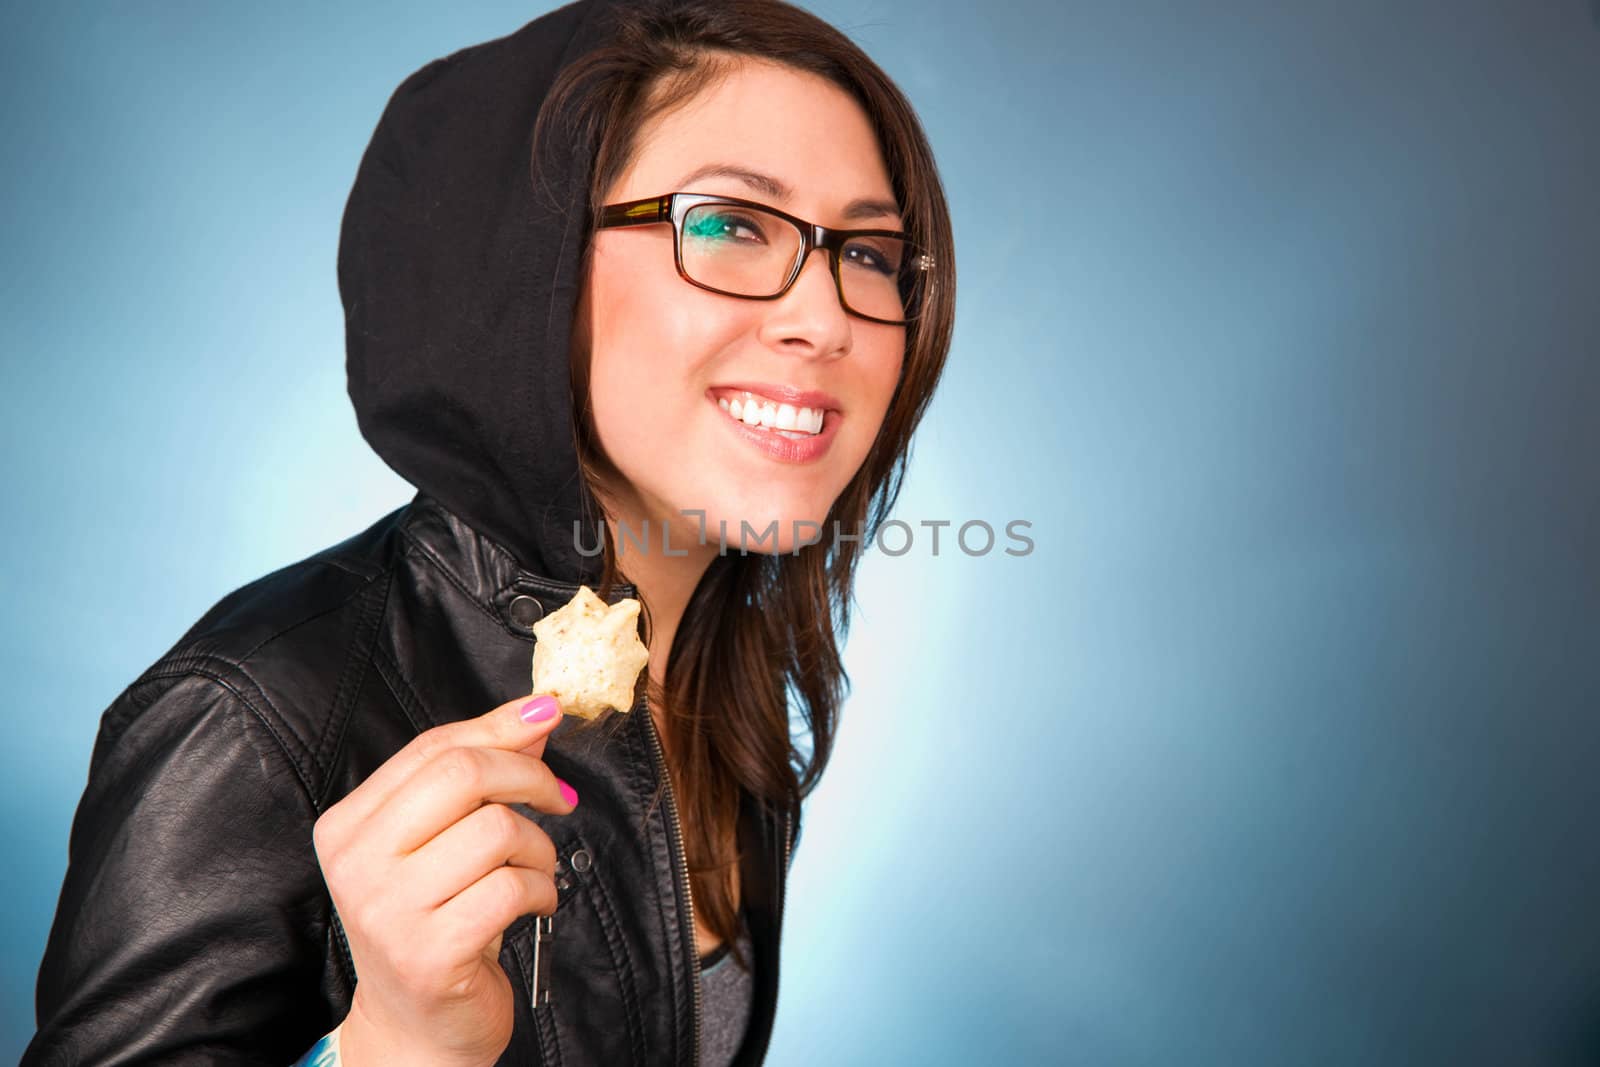 Young Woman Smiles While Chewing a Bite of Chips by ChrisBoswell